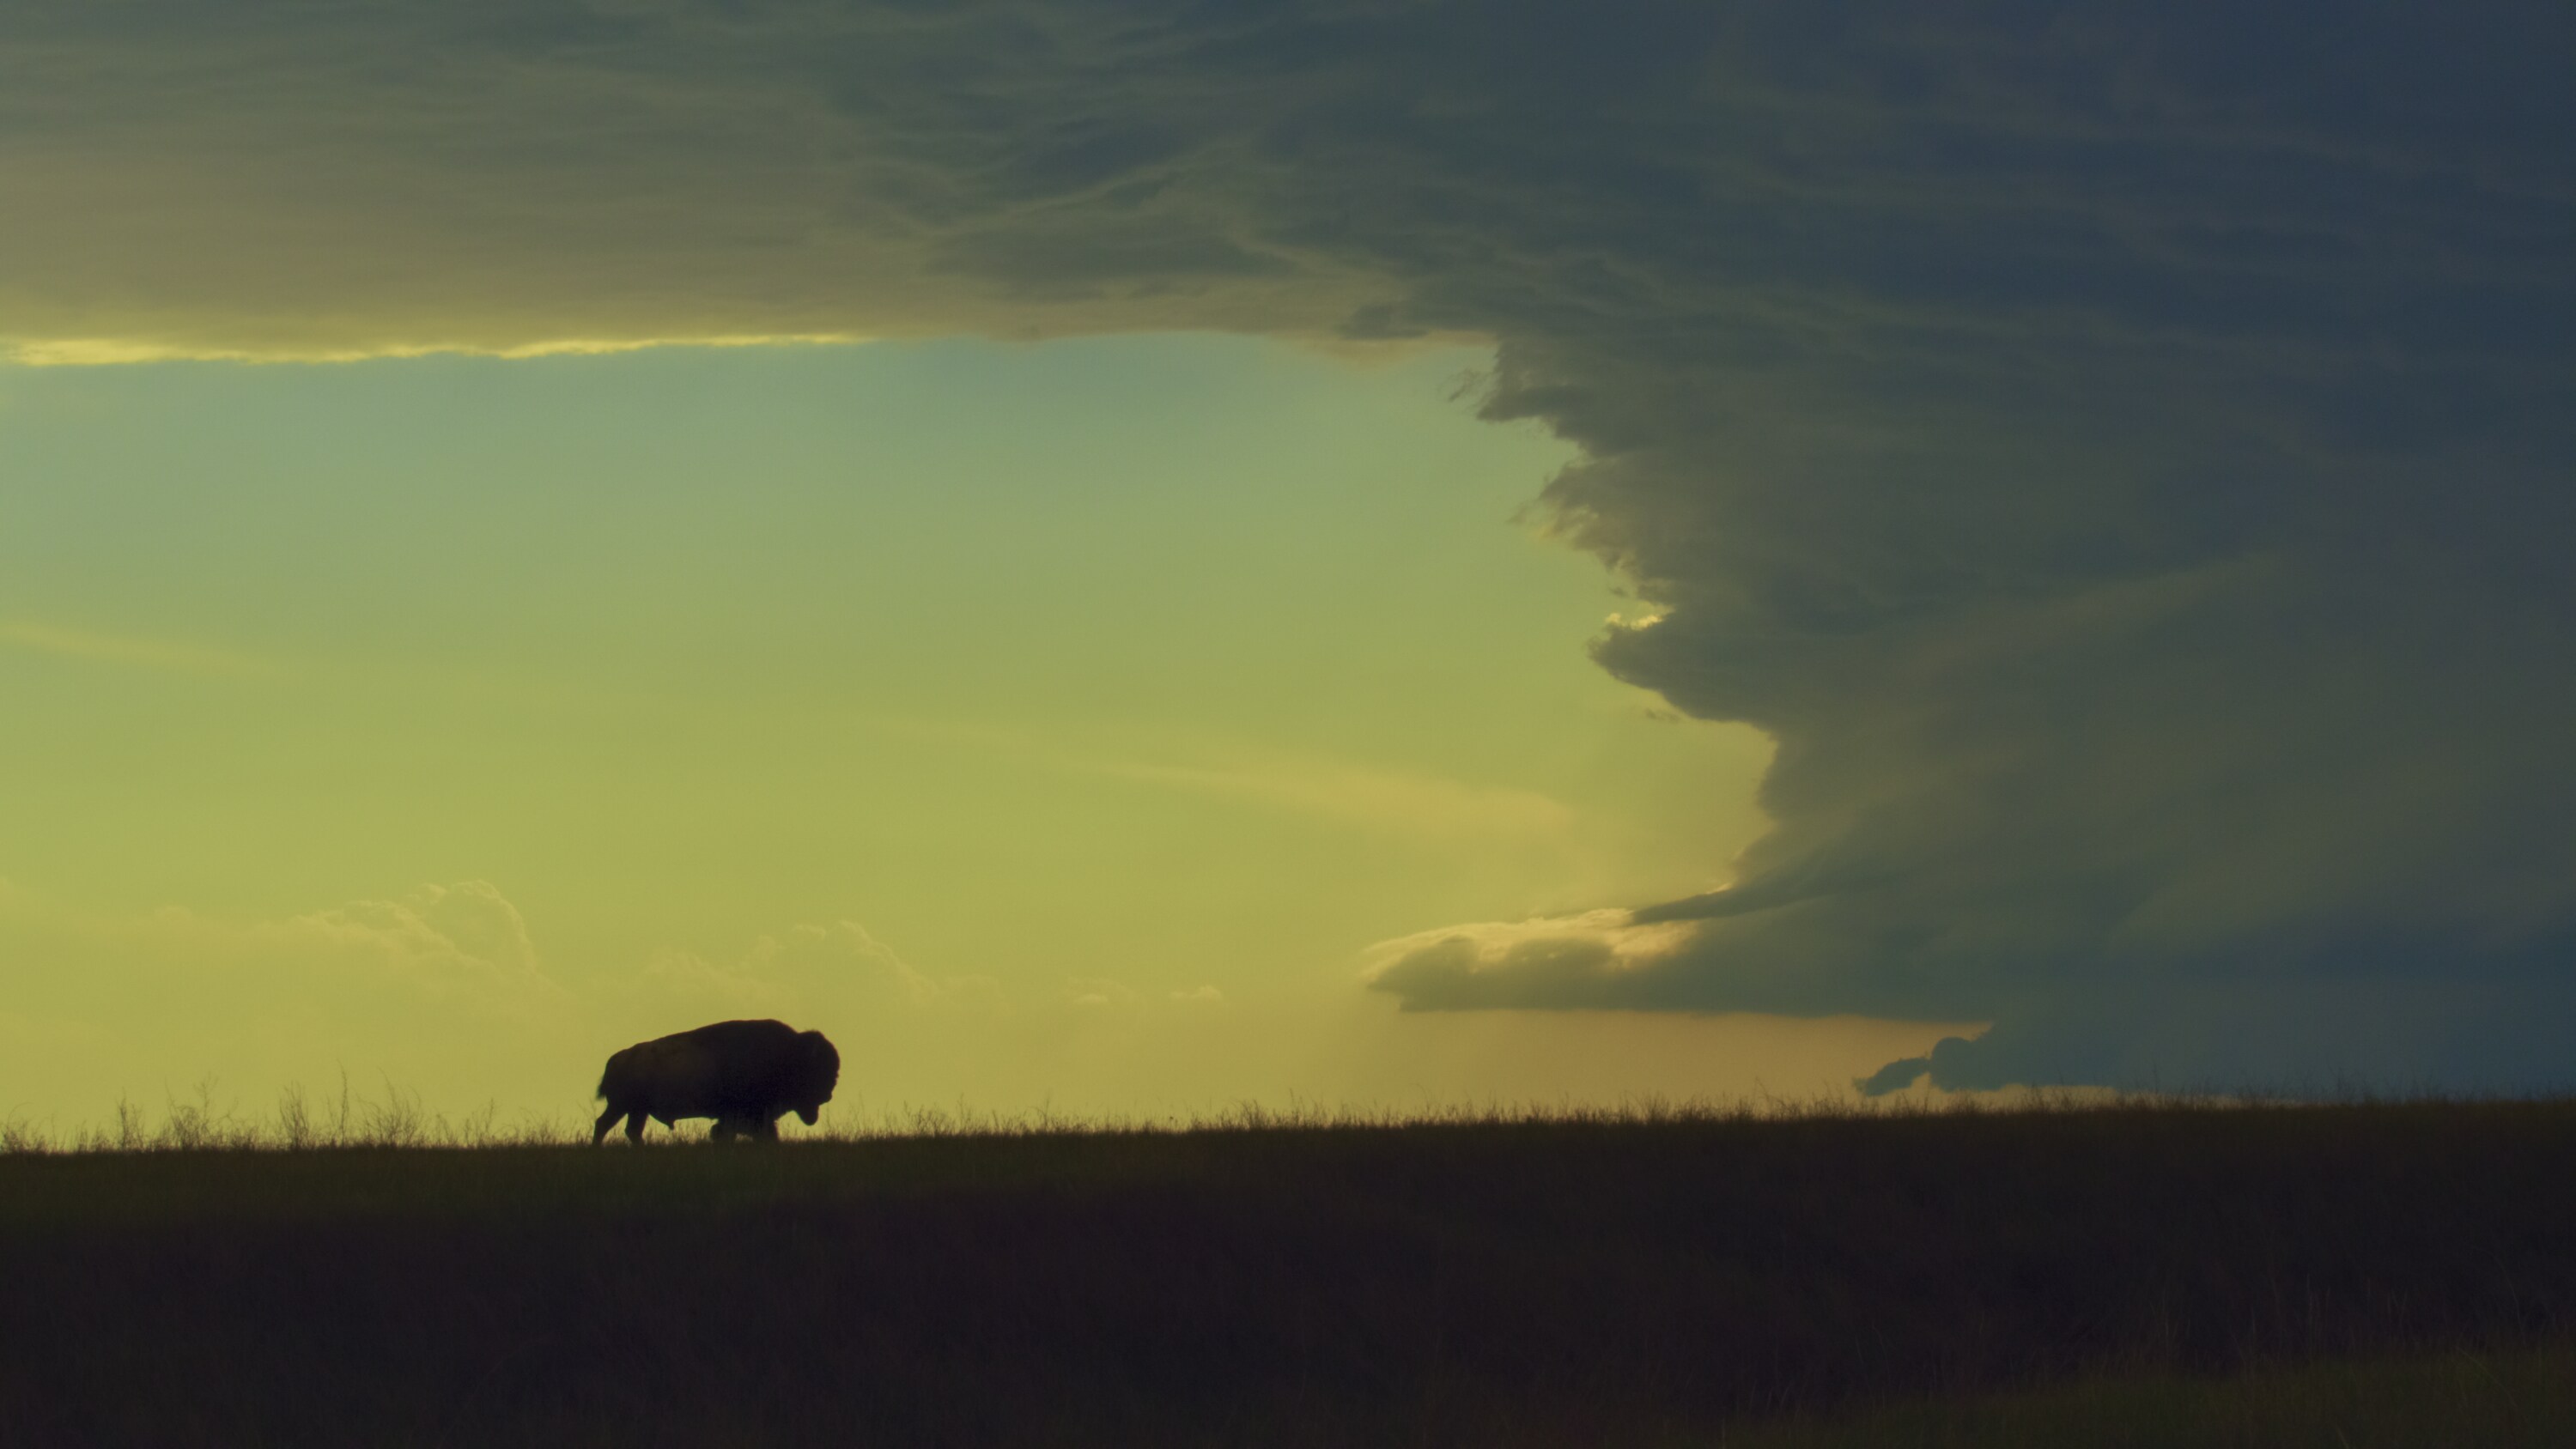 An American bison walks towards a storm cloud. (National Geographic for Disney+)